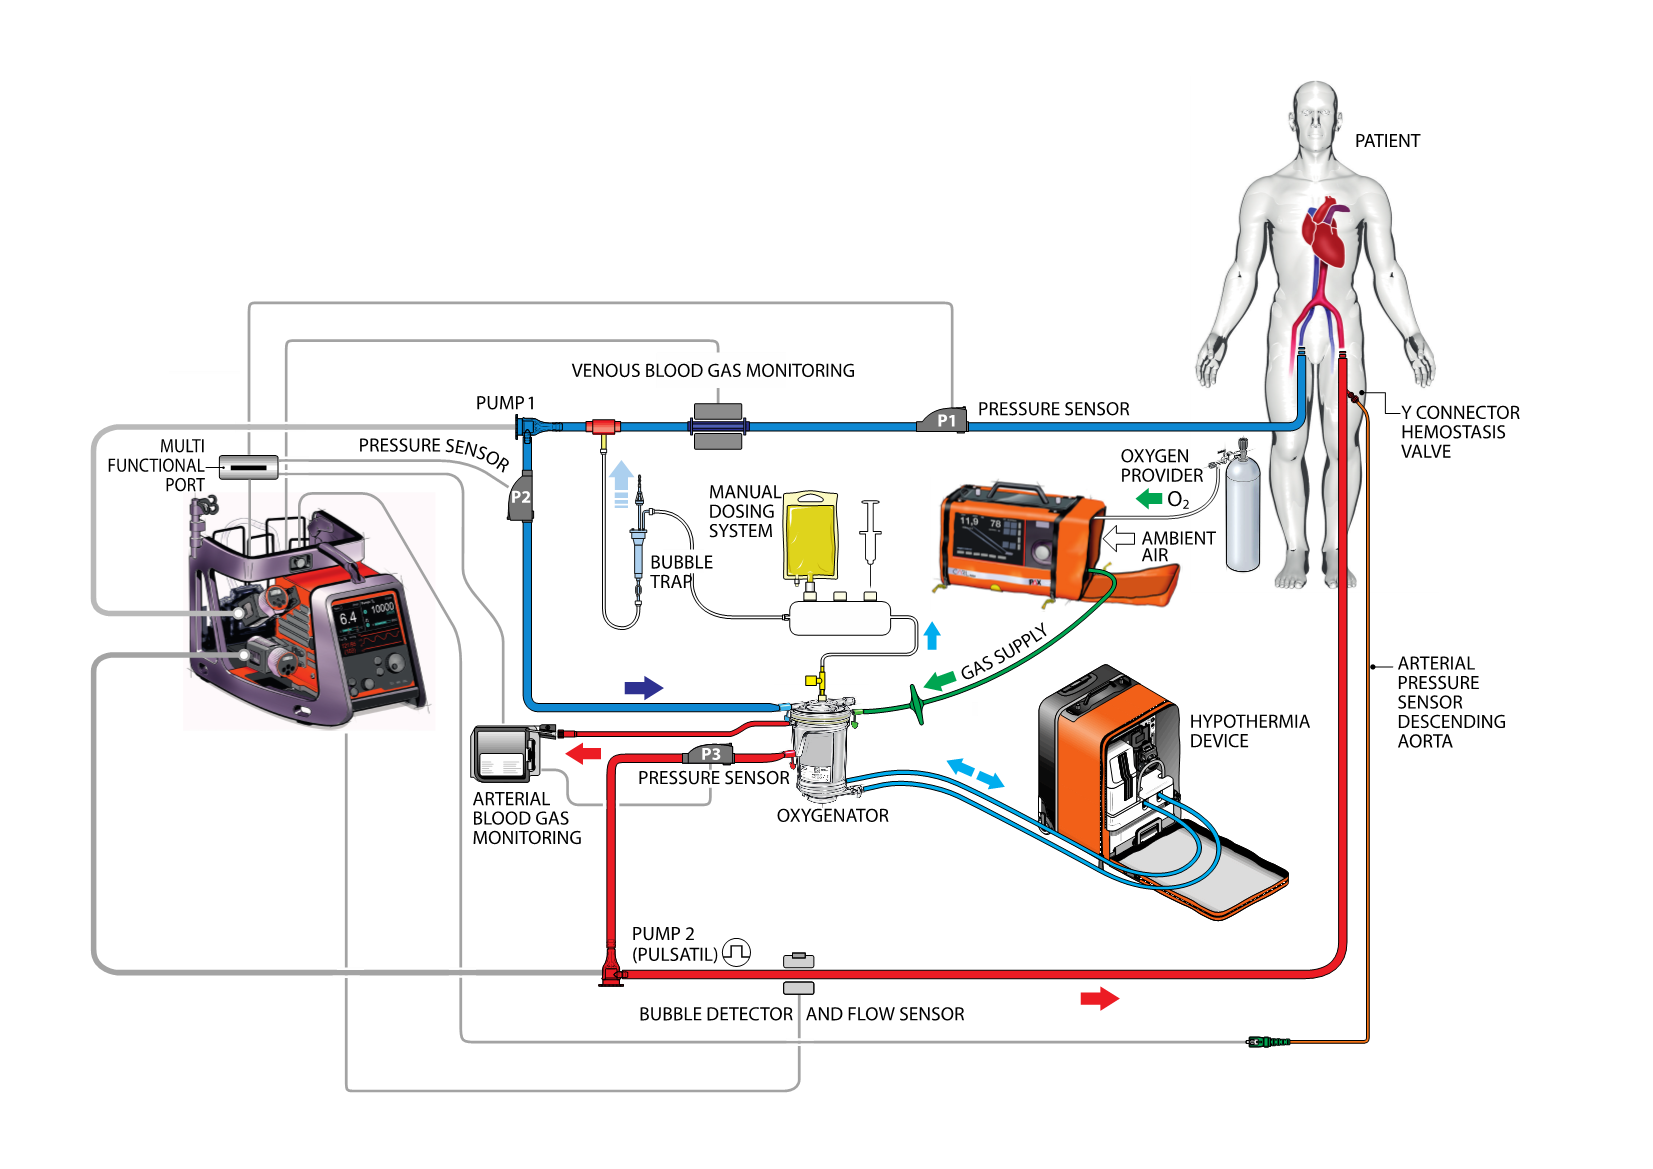 A drawing shows which devices are used where in the extracorporeal circuit.